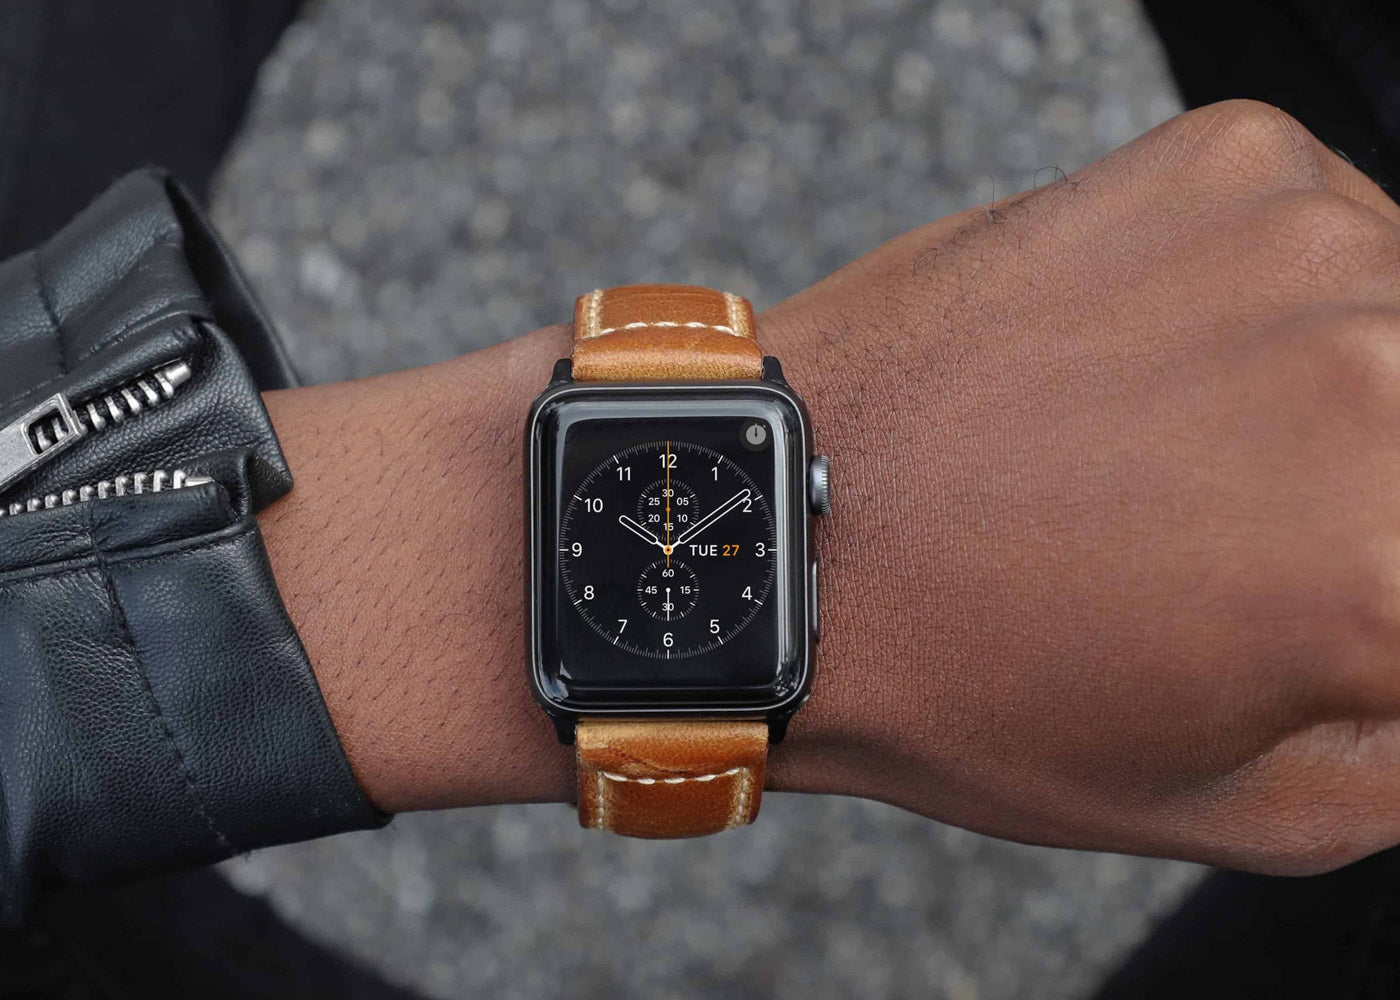 Apple watch leather band